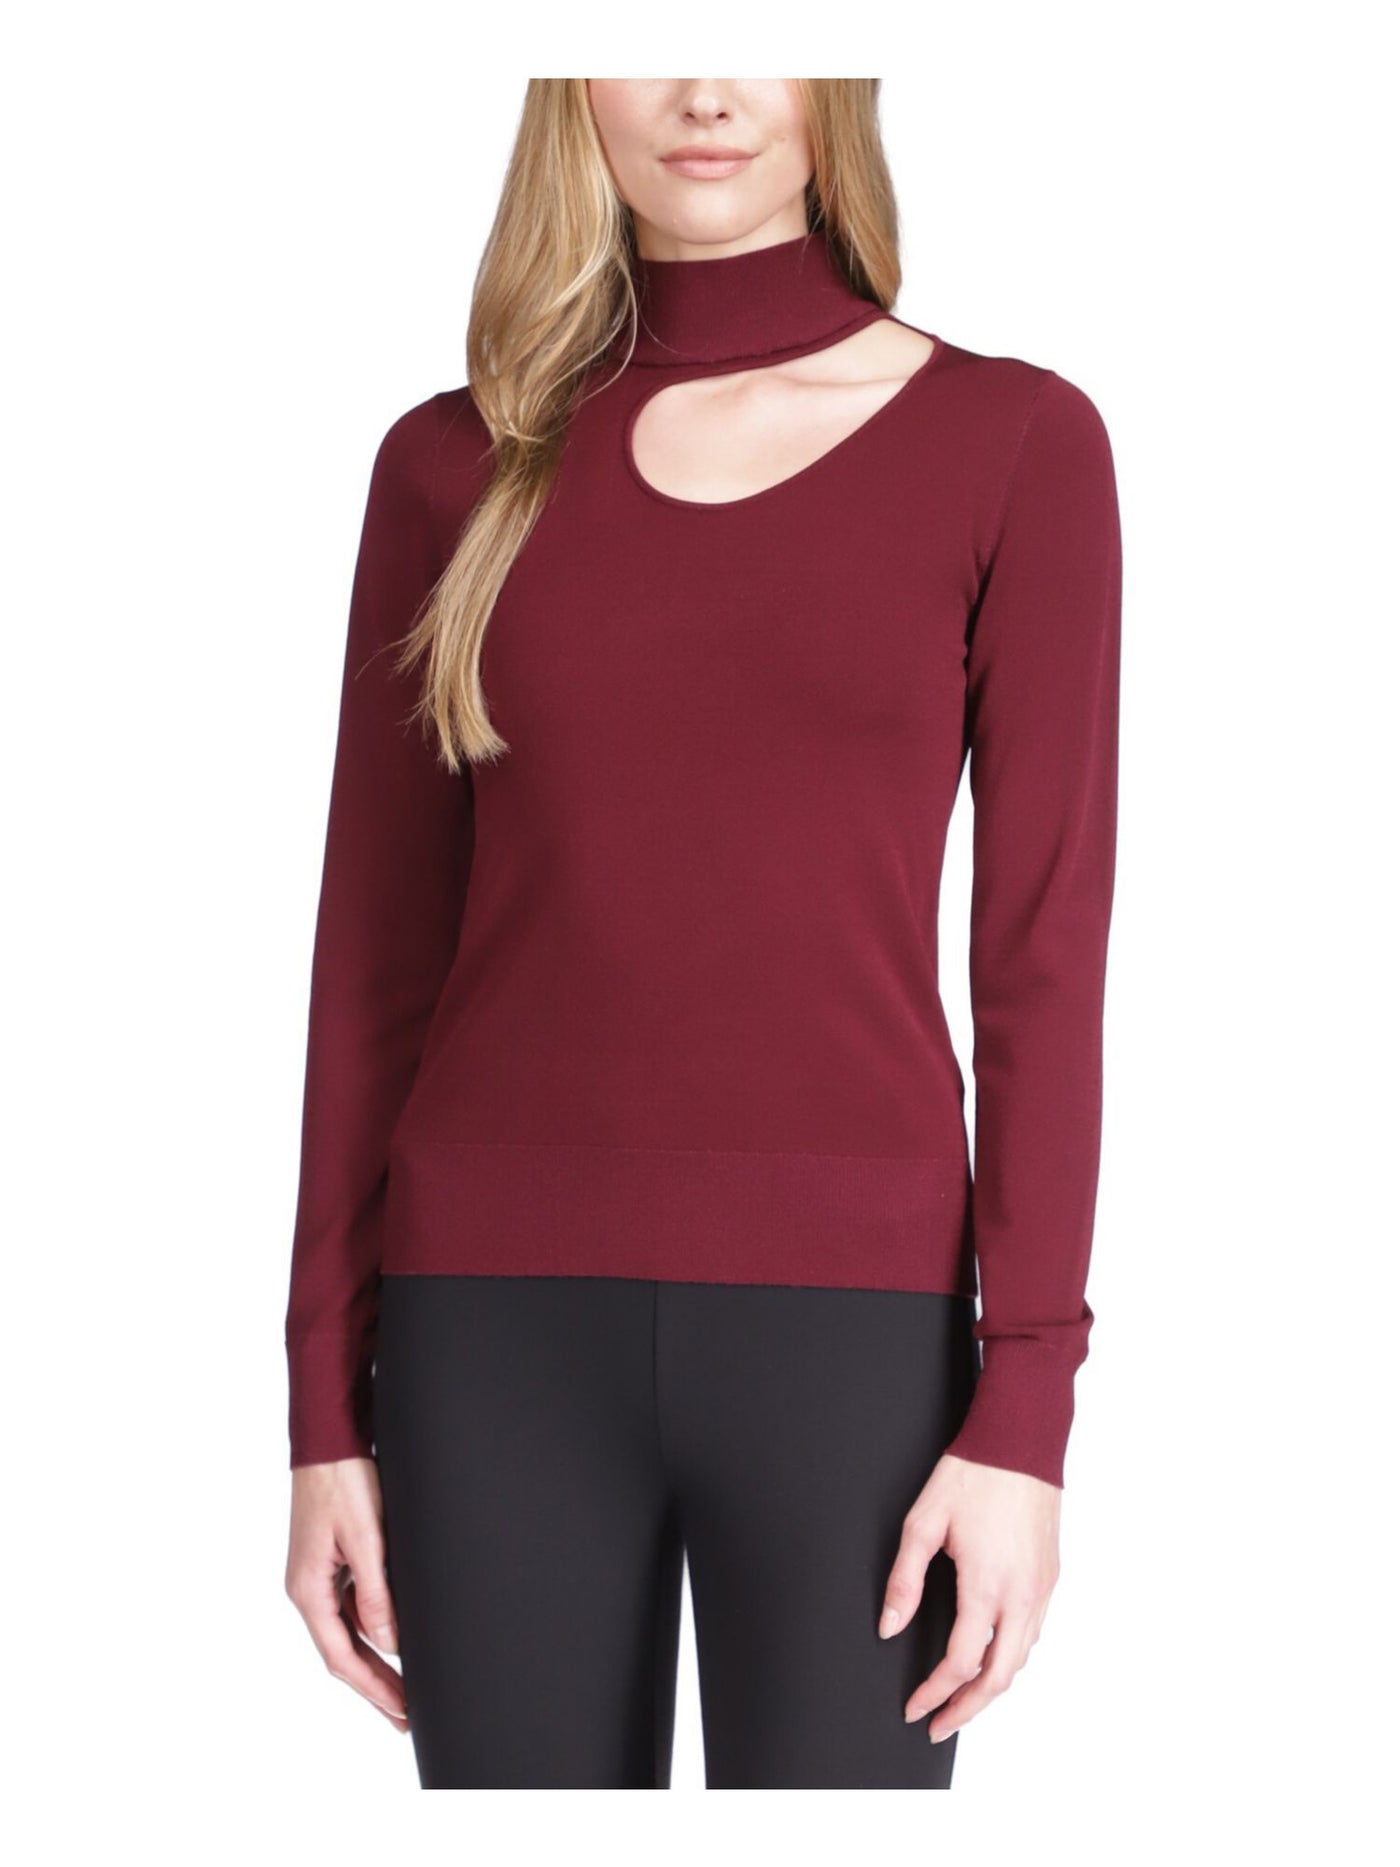 MICHAEL MICHAEL KORS Womens Maroon Cut Out Zippered Ribbed Trim Long Sleeve Mock Neck Sweater XL